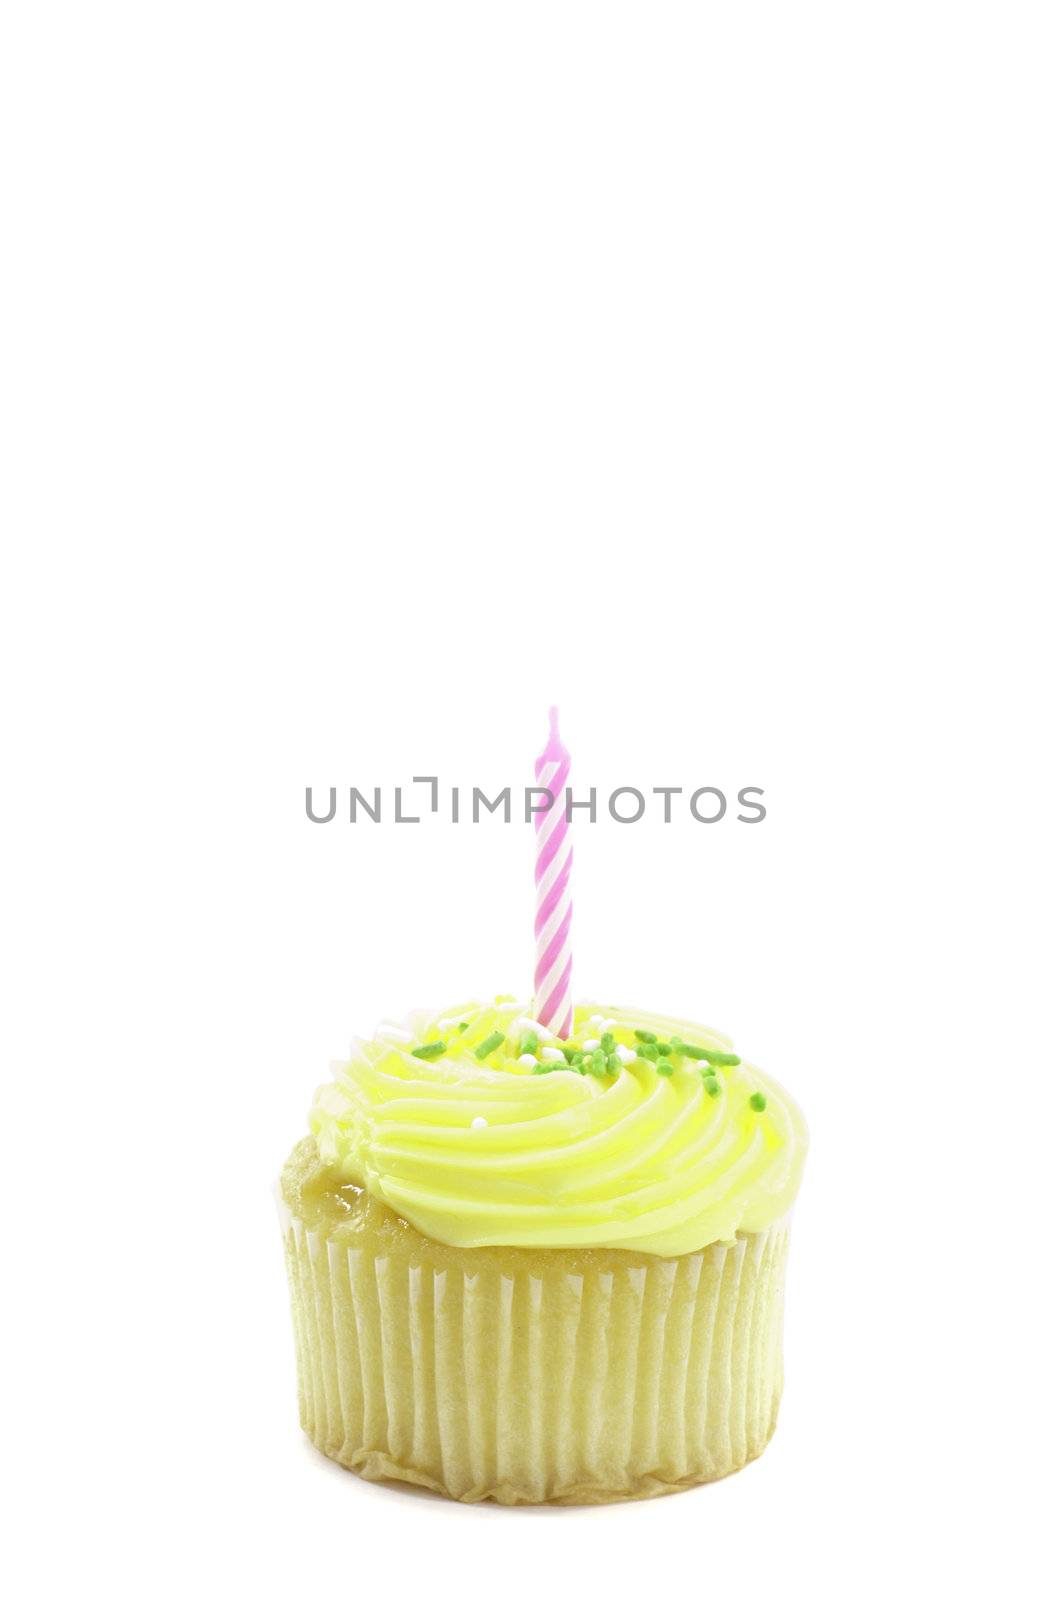 cupcake, isolated on white with a decorative candle in it